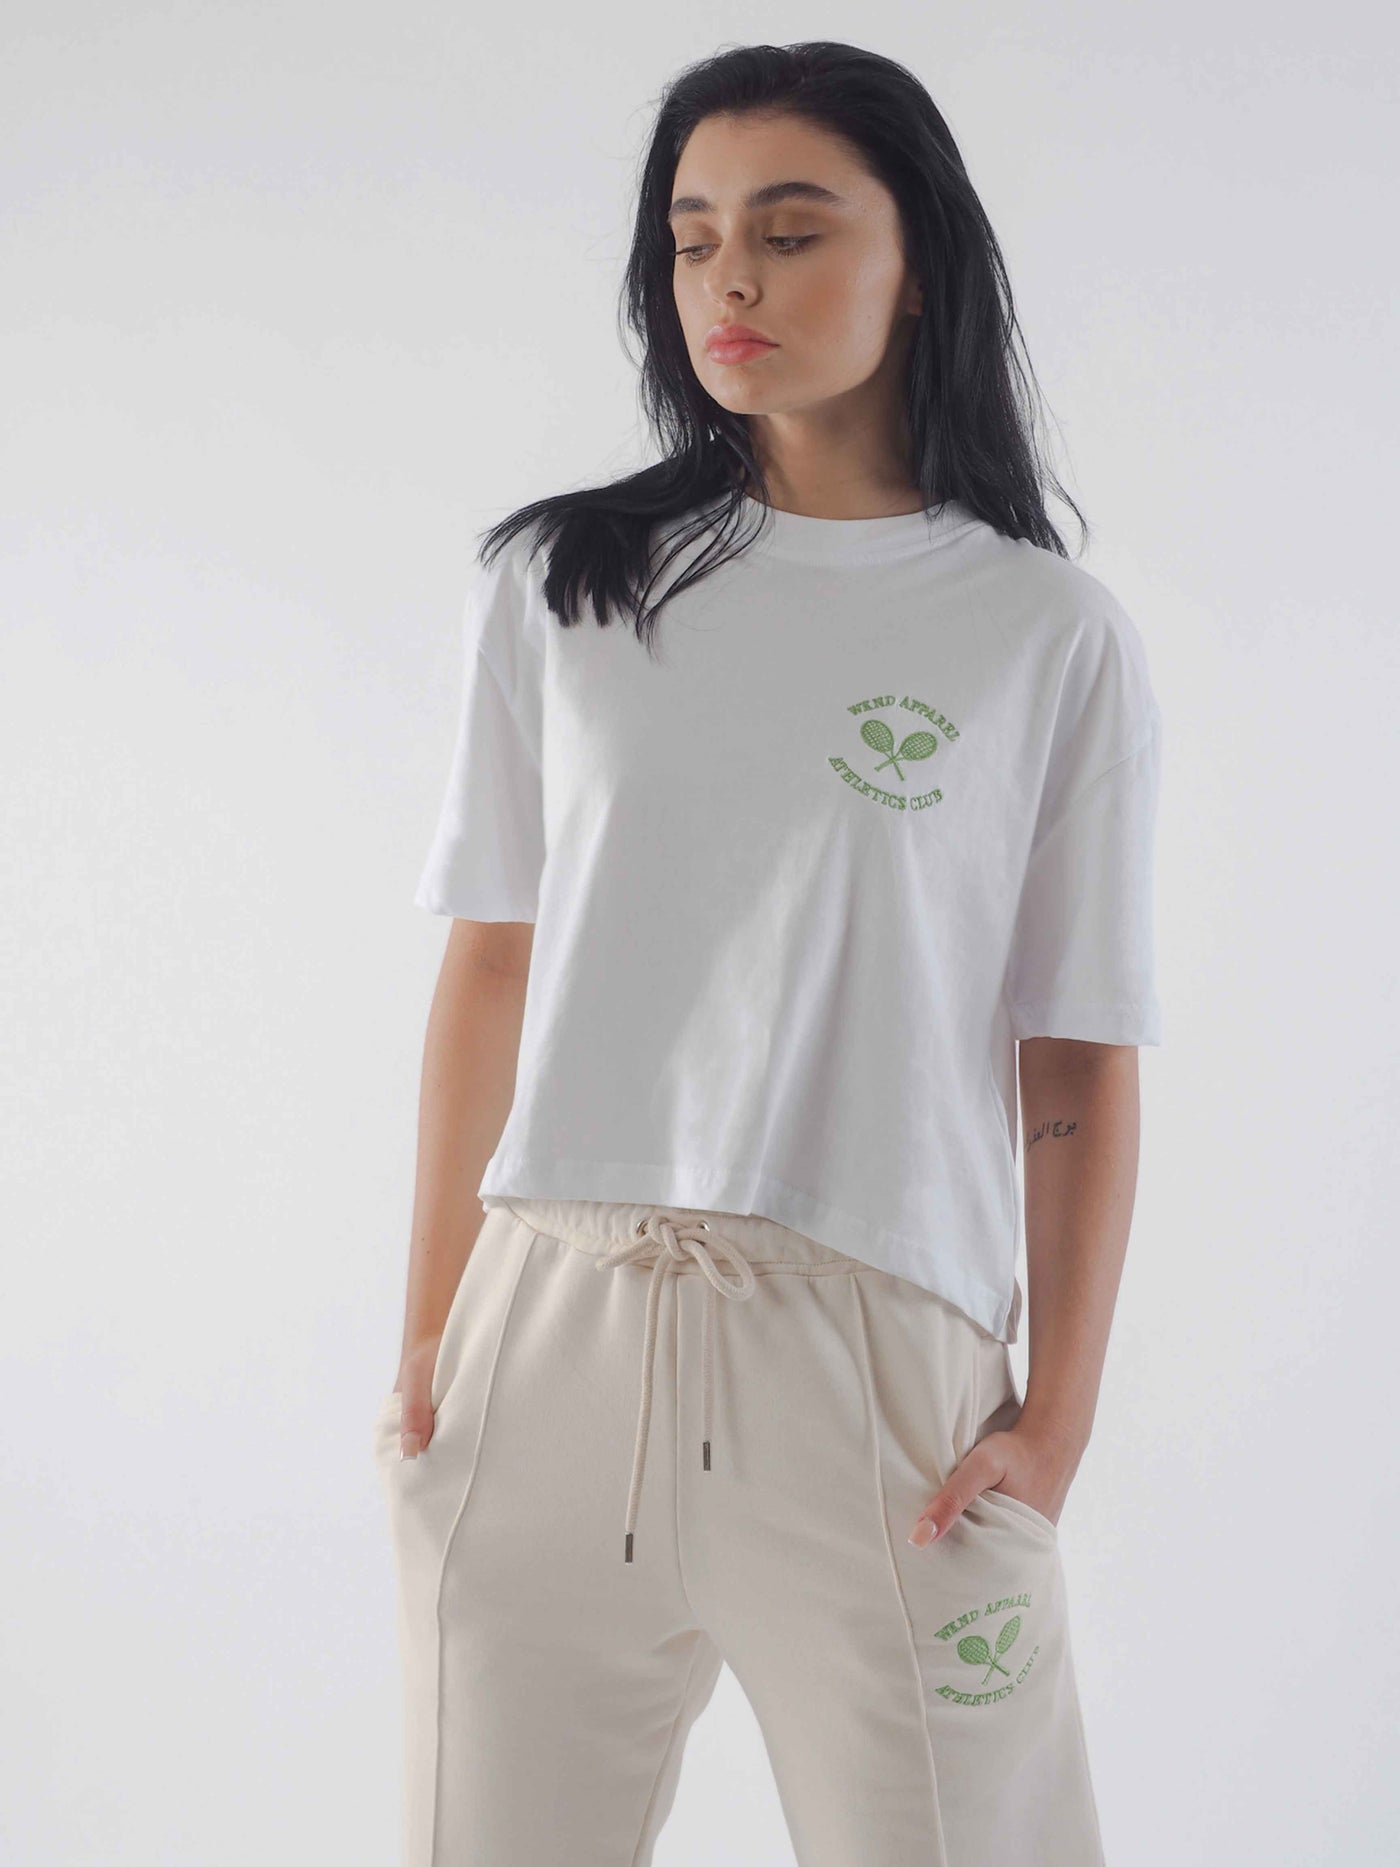 Model with dark hair wearing an oversized cropped white t-shirt. The WKND Apparel tennis logo is embroidered to the chest.  Model is also wearing eggnog joggers.